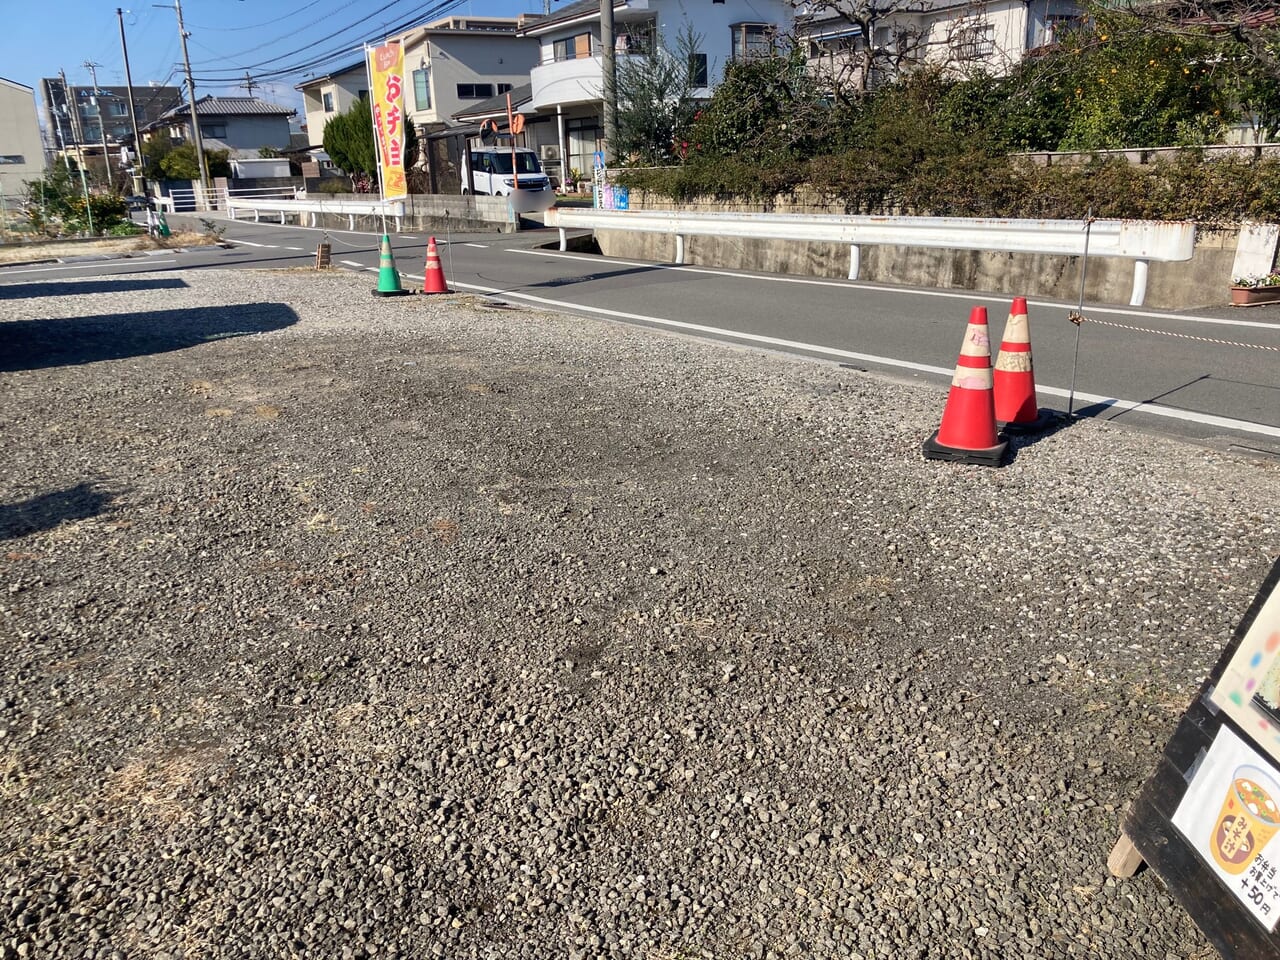 let's余戸キッチンカー駐車場